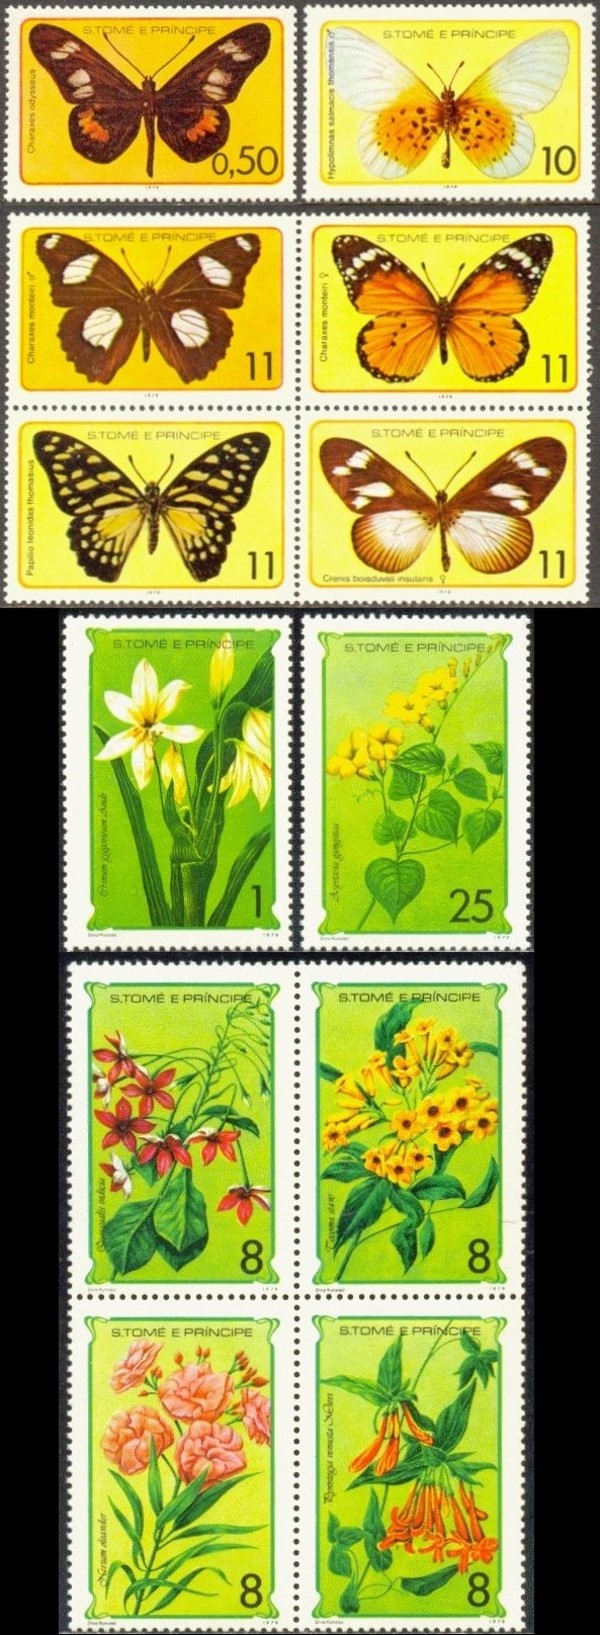 1979 Saint Thomas and Prince Islands Flowers and Butterflies Stamps